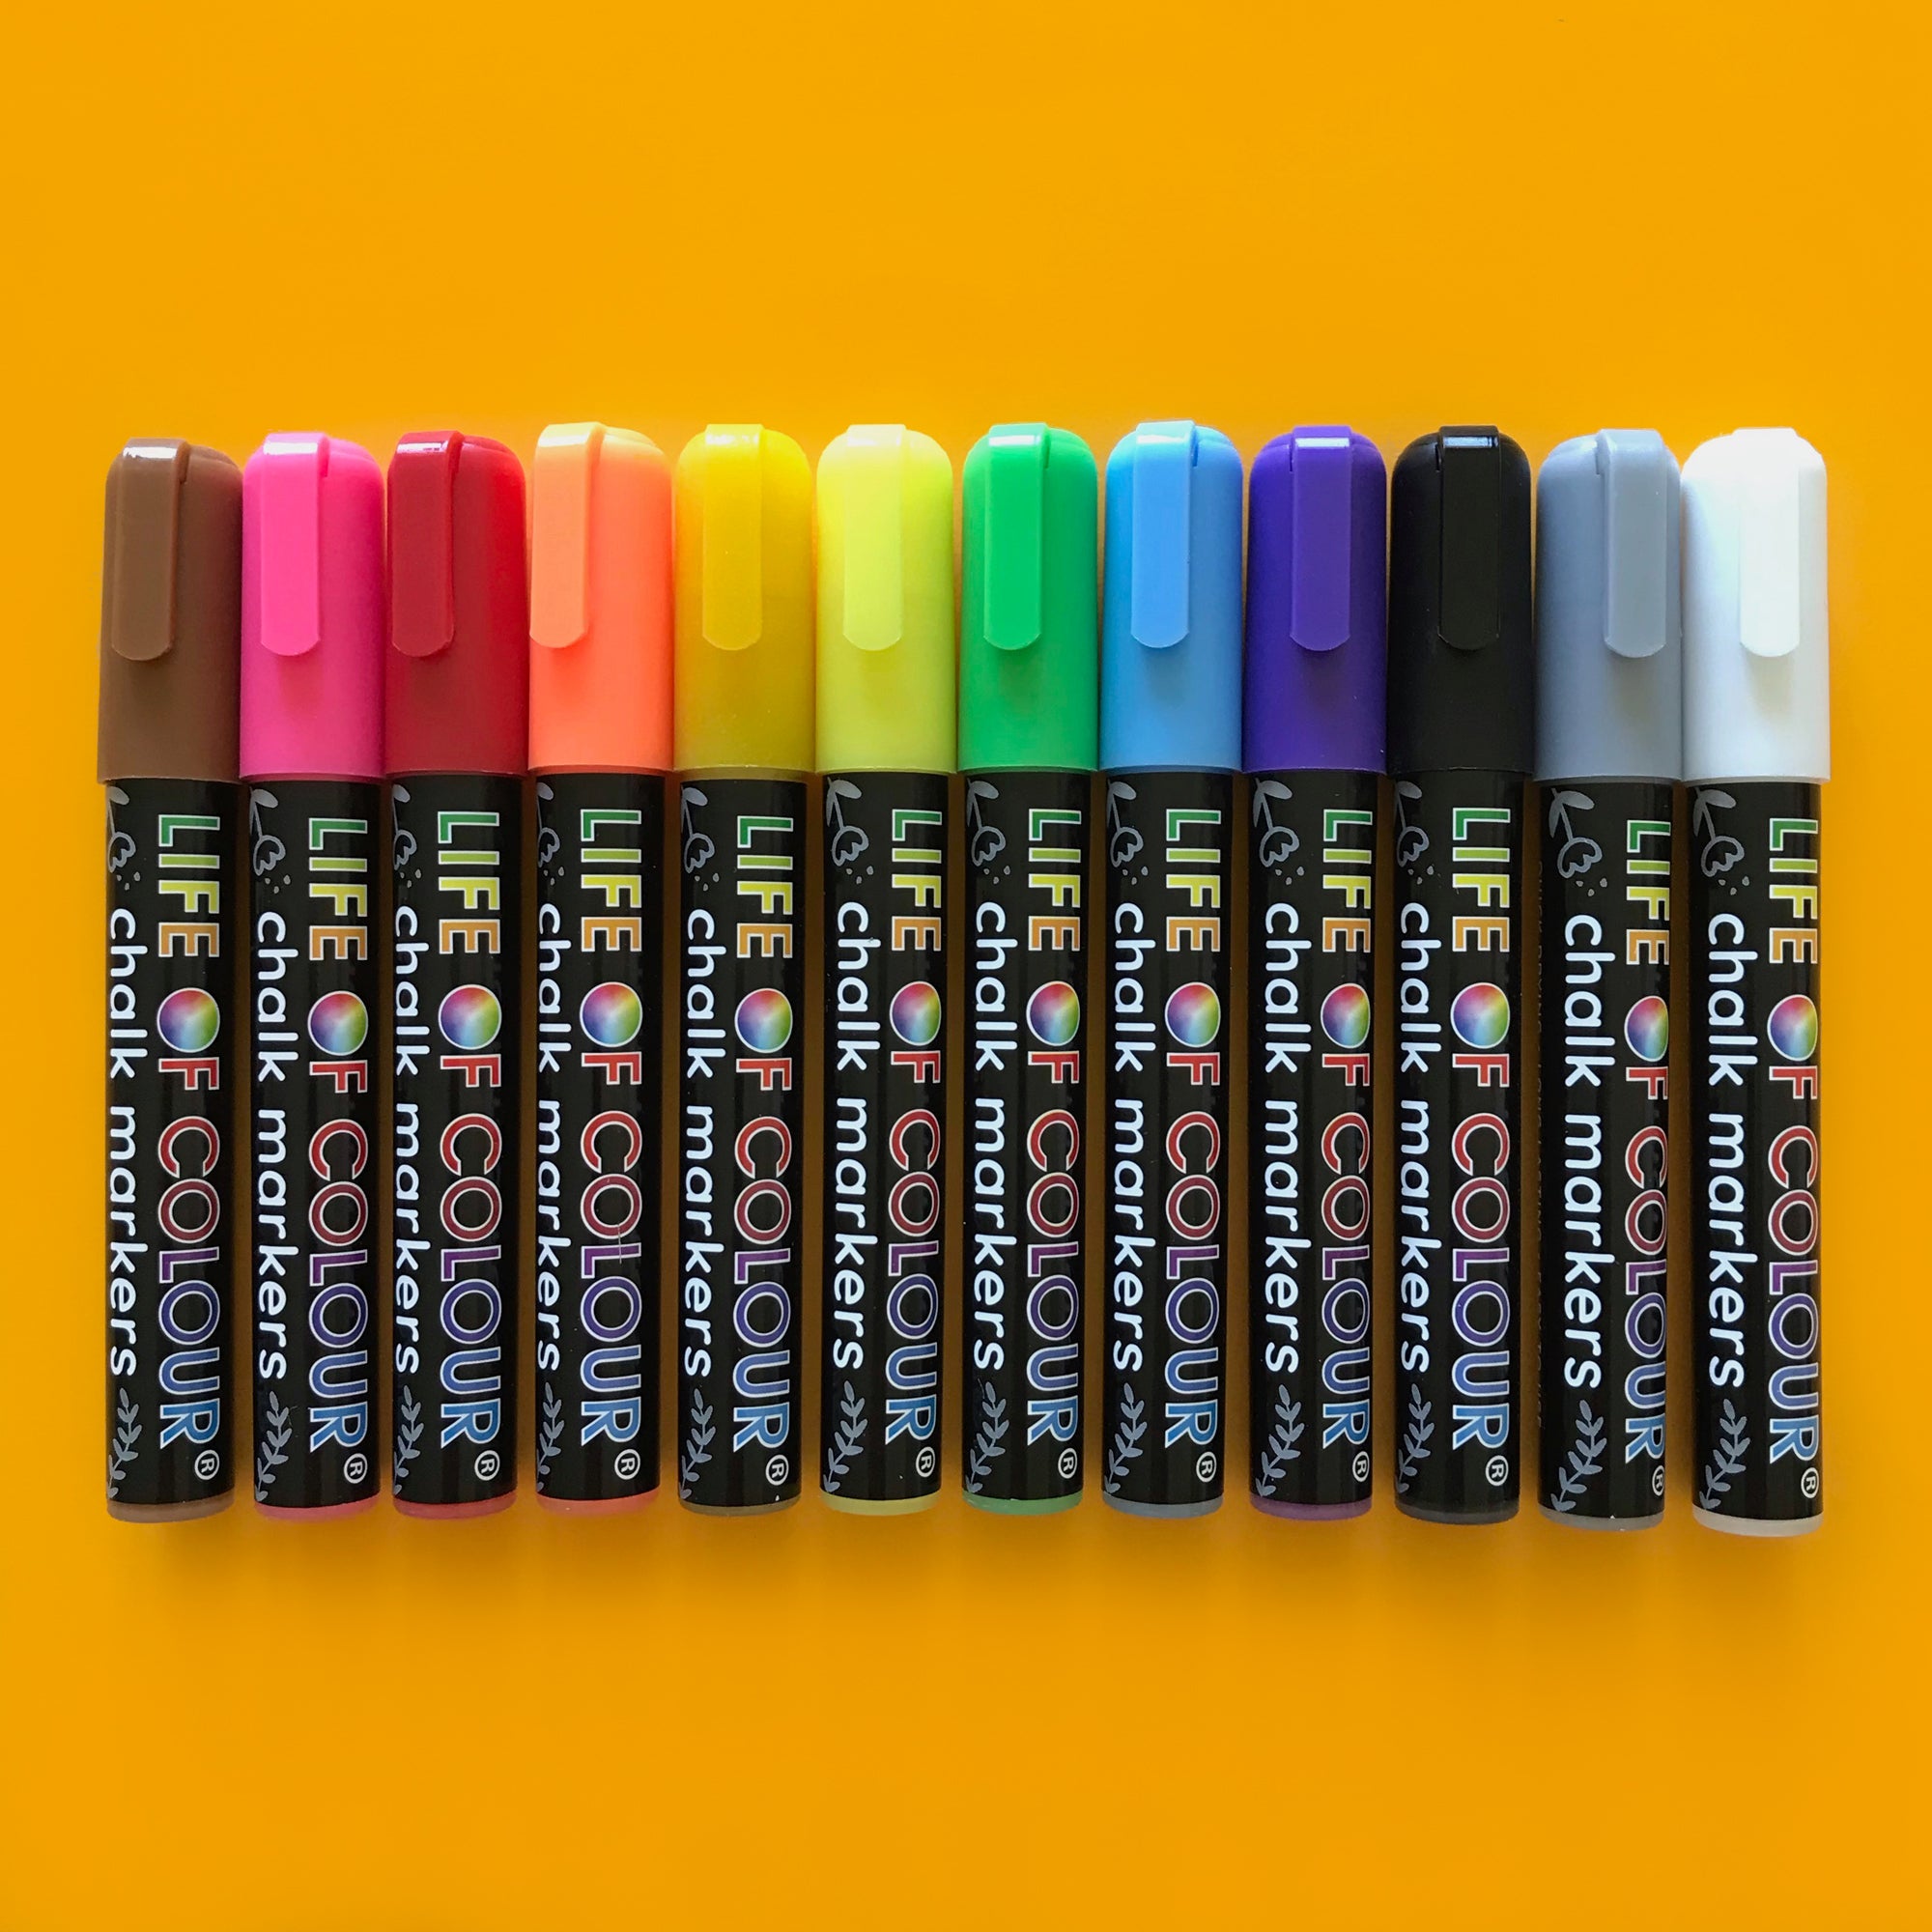 Neon, Classic & Metallic Colors Chalk Markers with 6mm Reversible